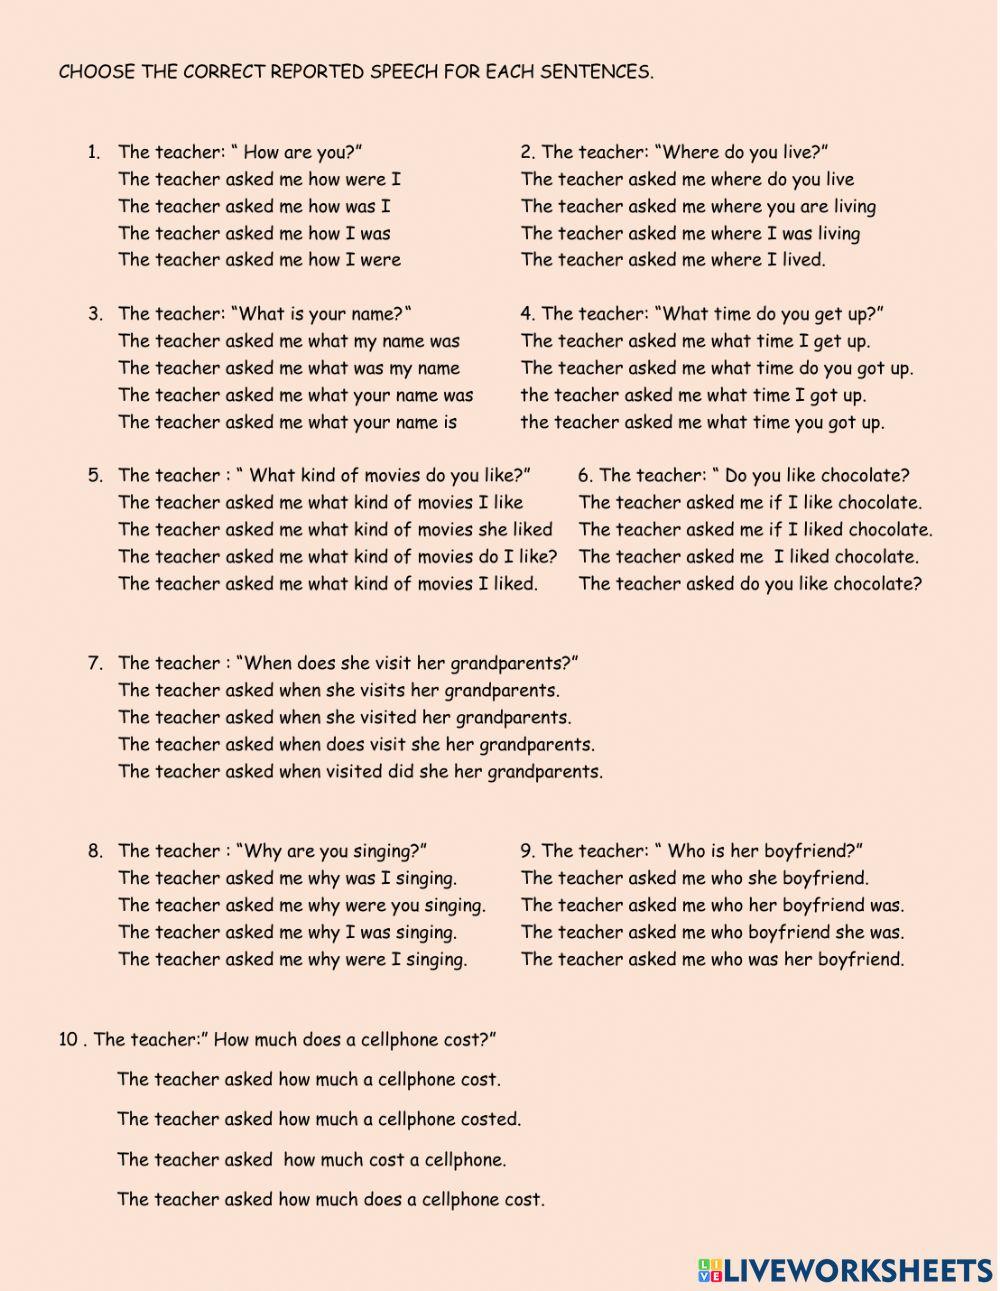 Reported speech questions (simple present)